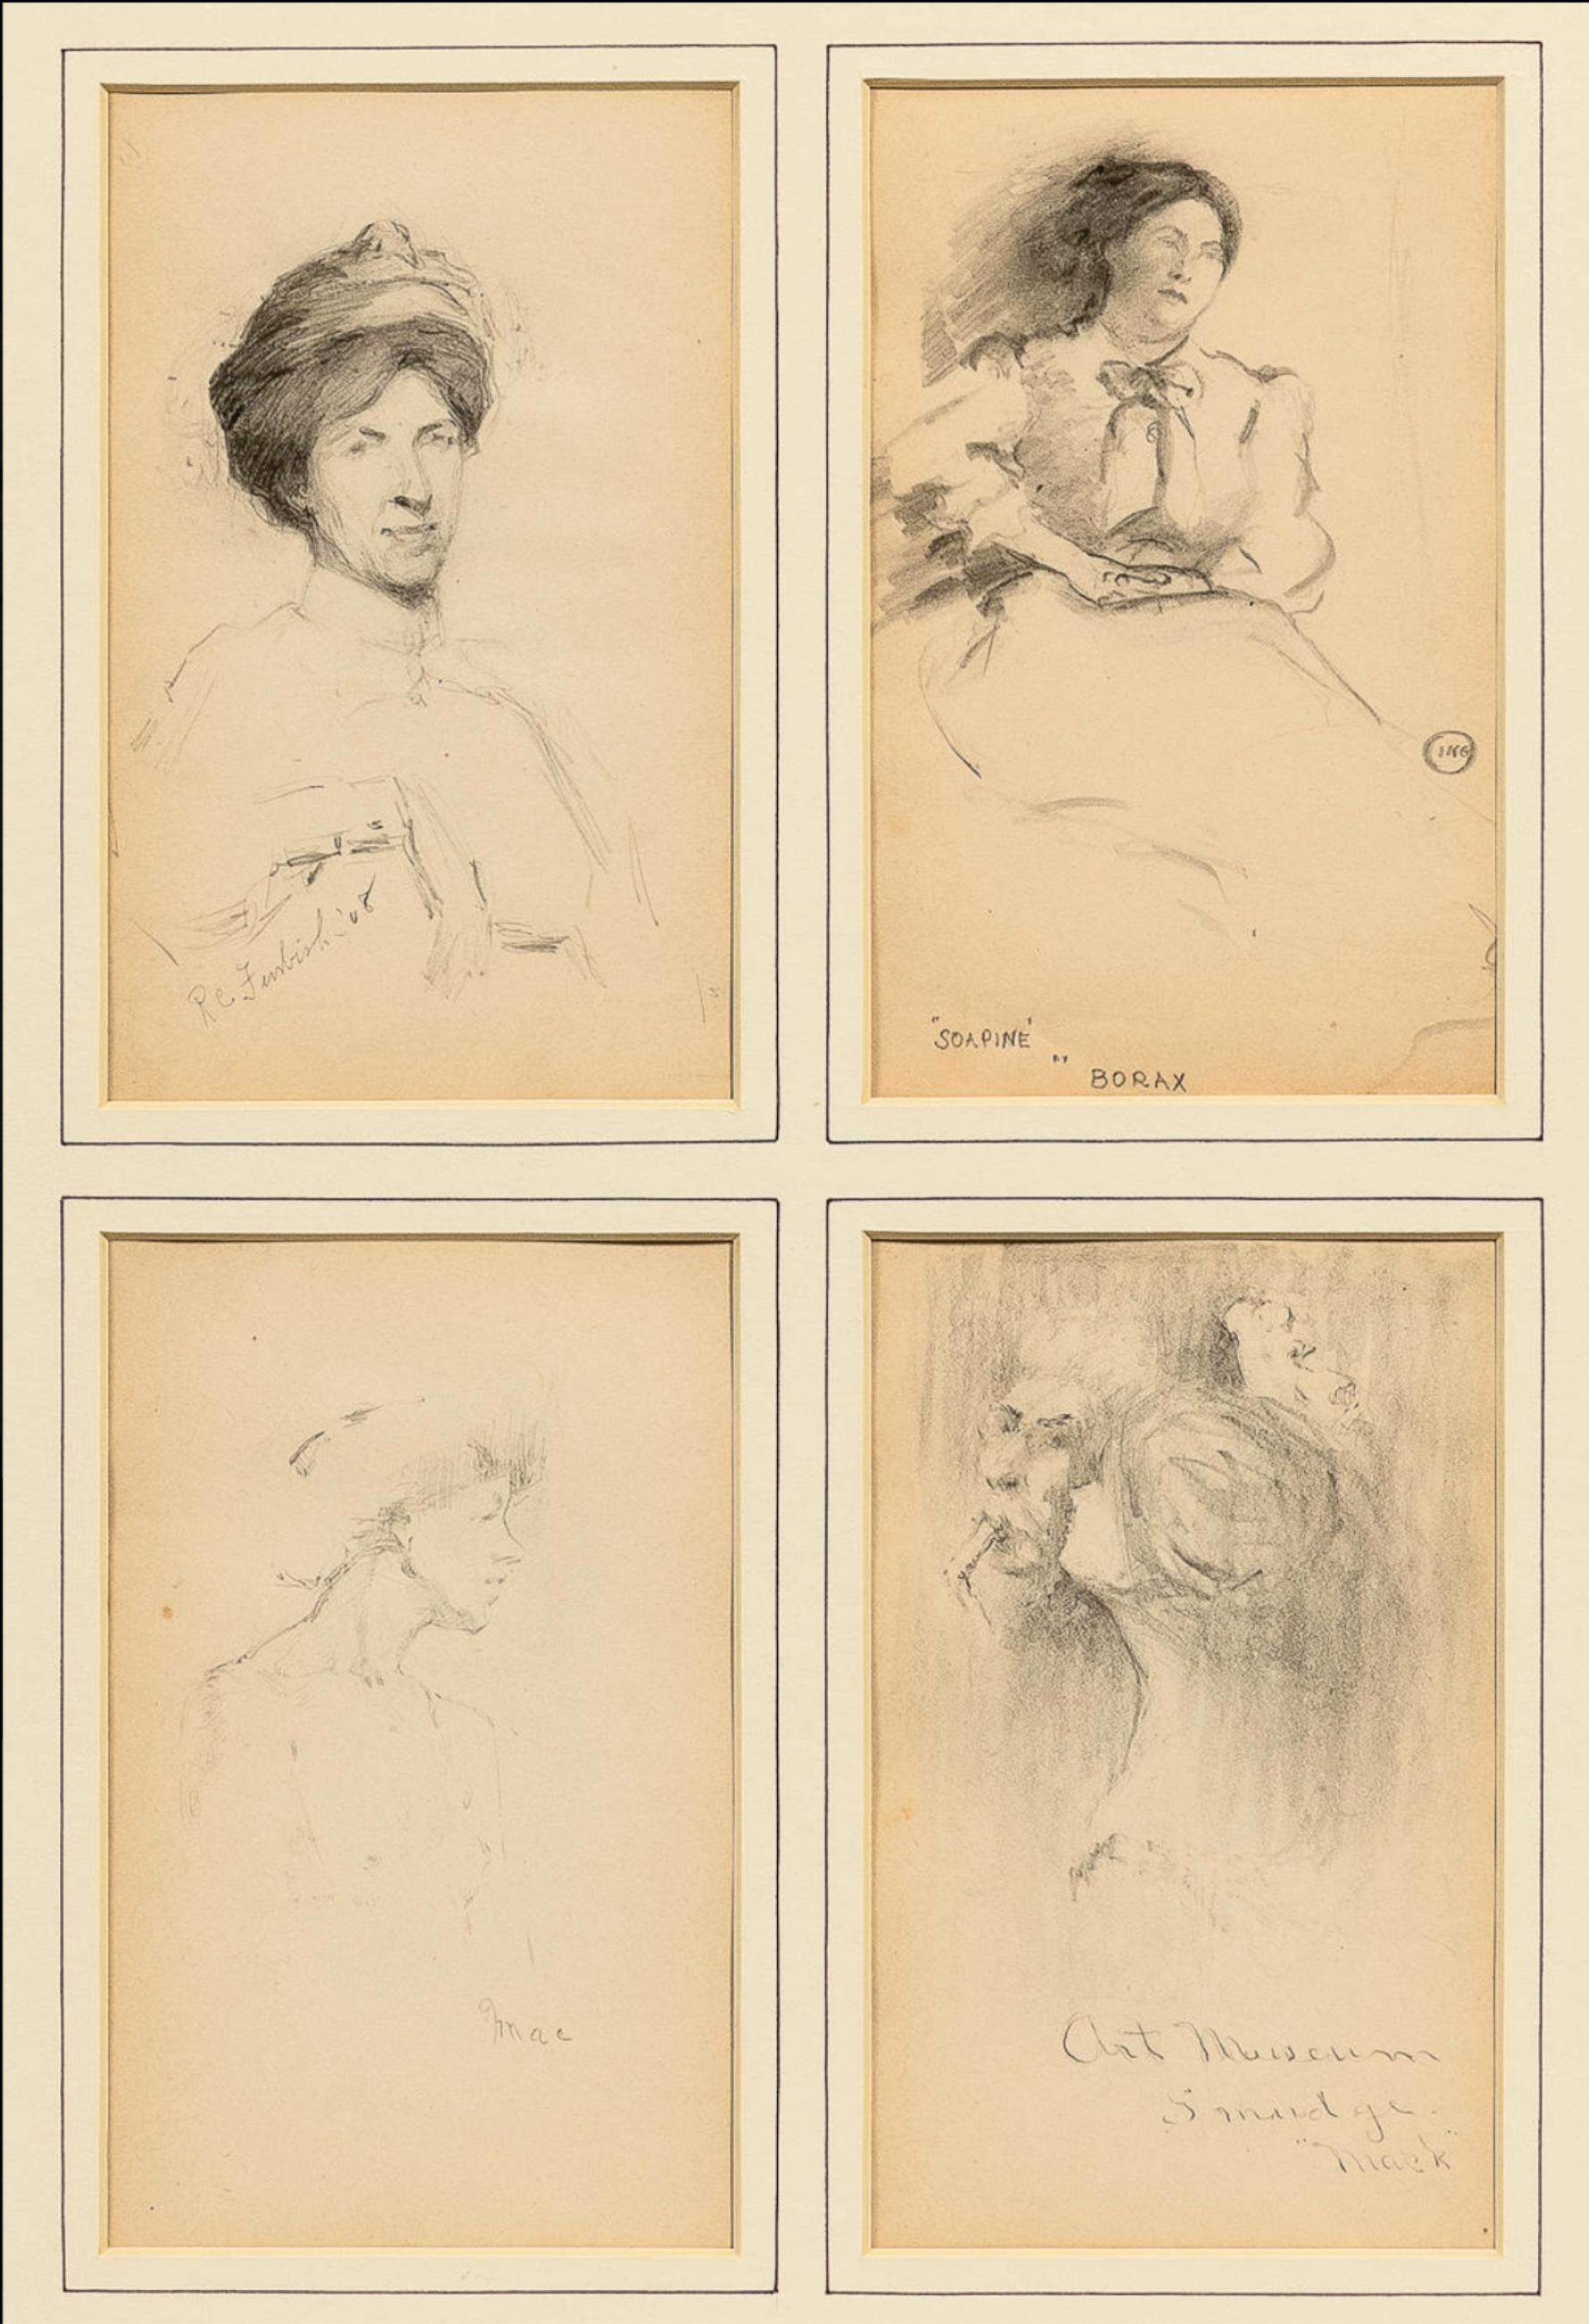 4 Drawings by a Boston Artist, Signed from 1908 D1
Four drawings of figures, each 7.25